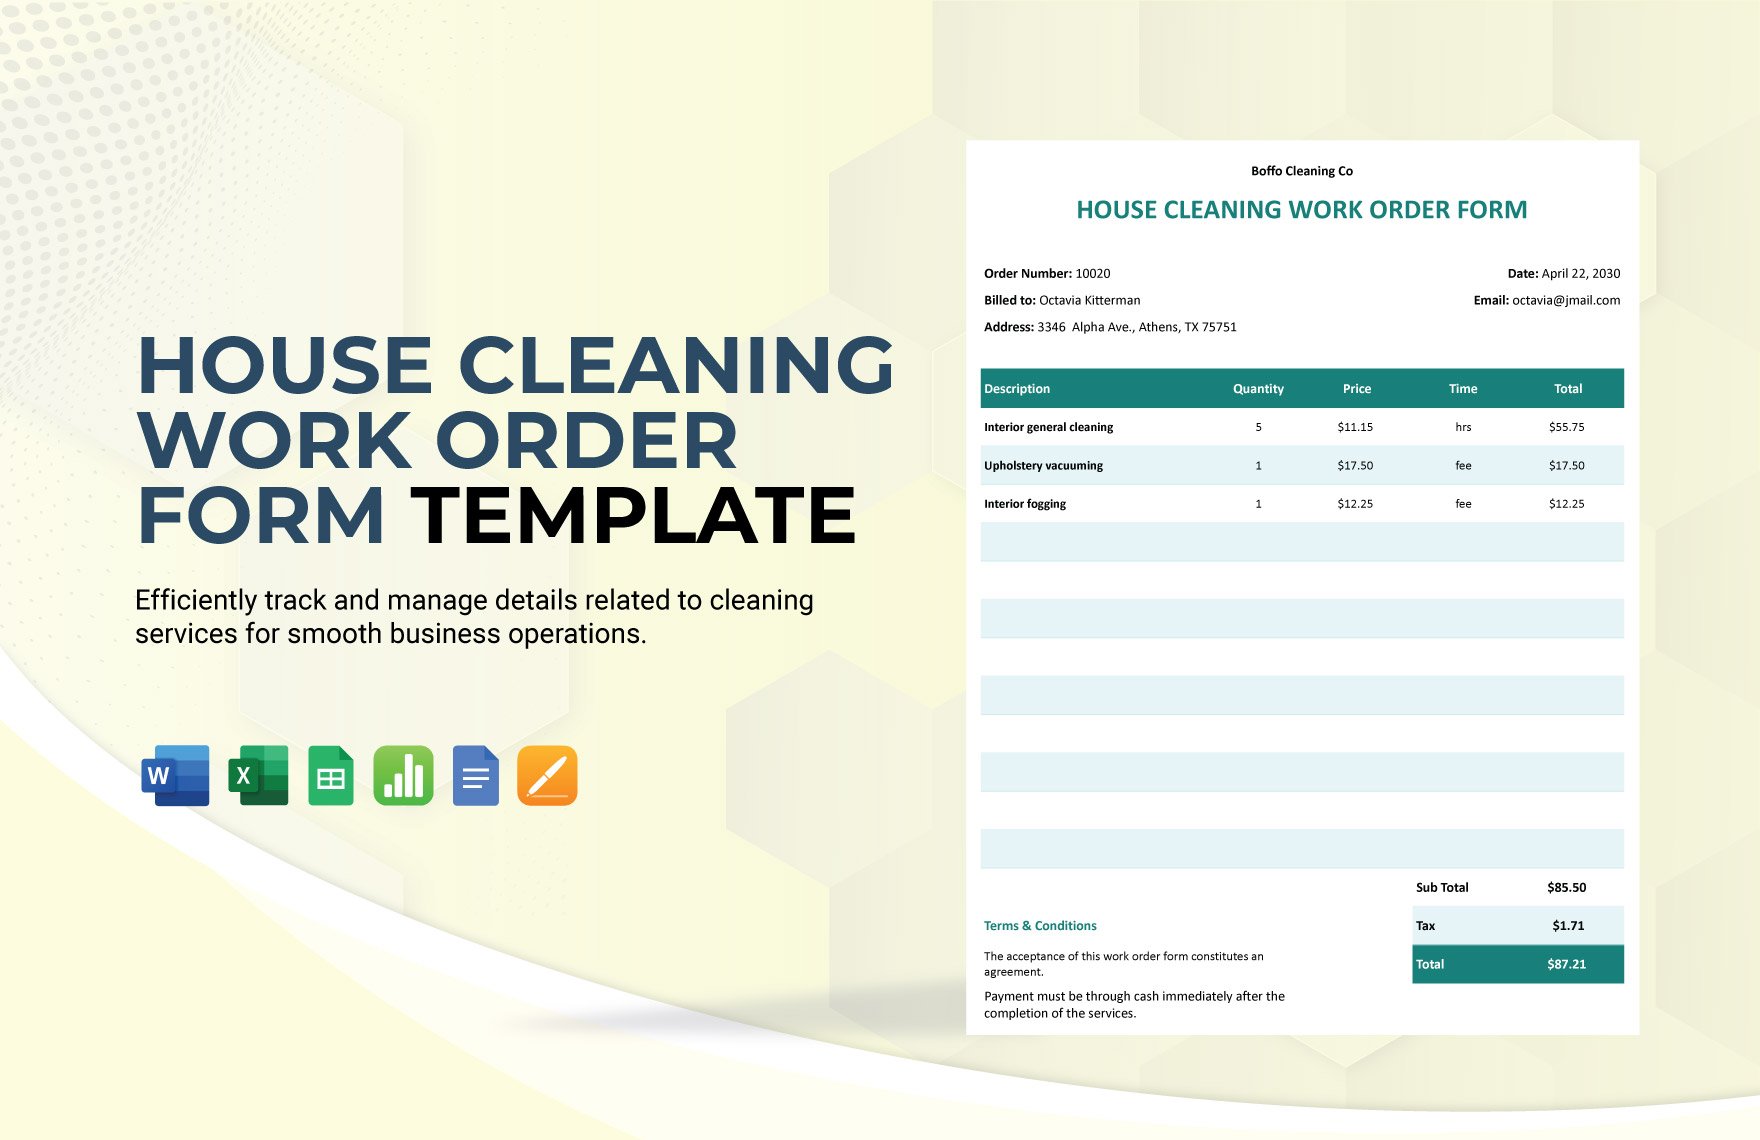 House Cleaning Work Order Form Template in Word, Google Docs, Excel, Google Sheets, Apple Pages, Apple Numbers